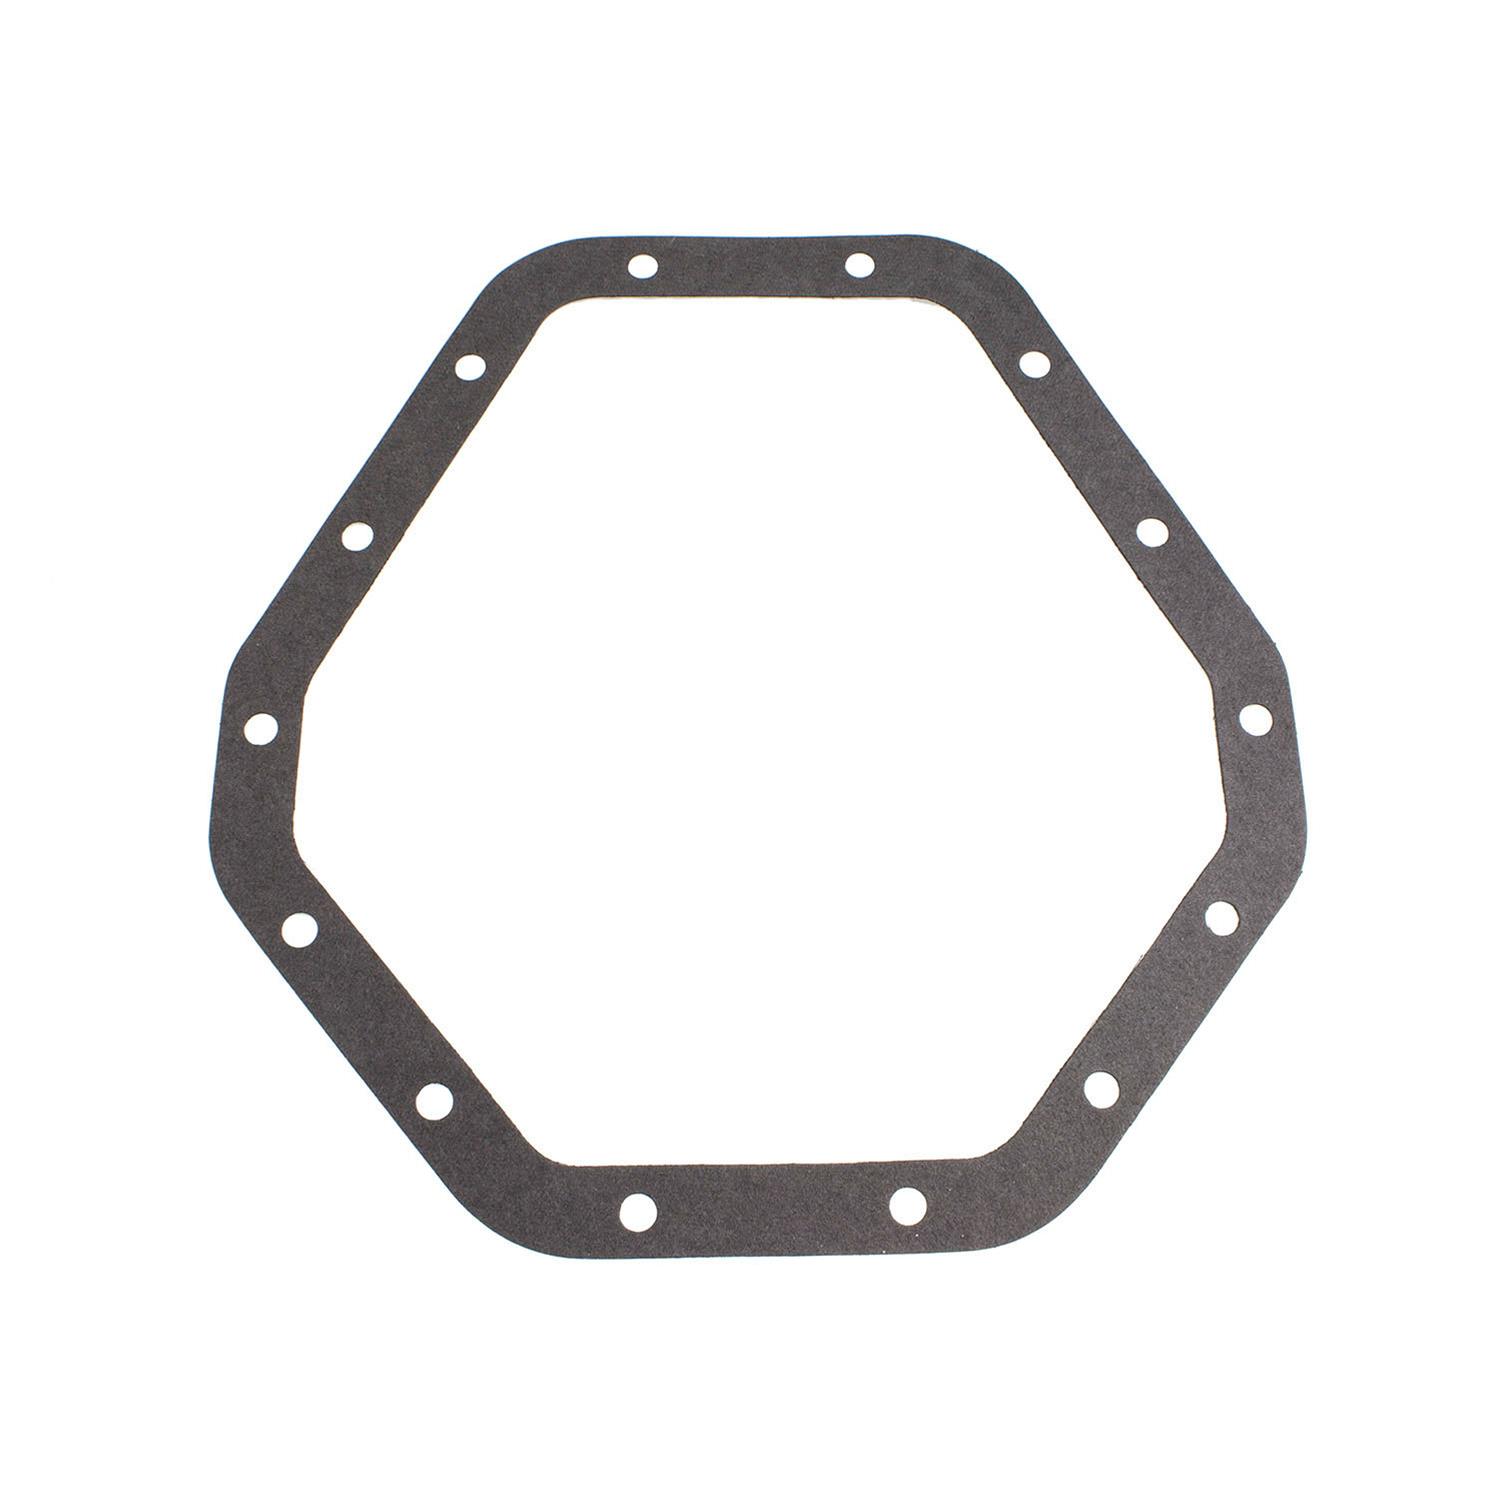 Motive Gear Differential Cover Gasket 5106; Paper for 73-09 GM 8.2 8.625 8.5 